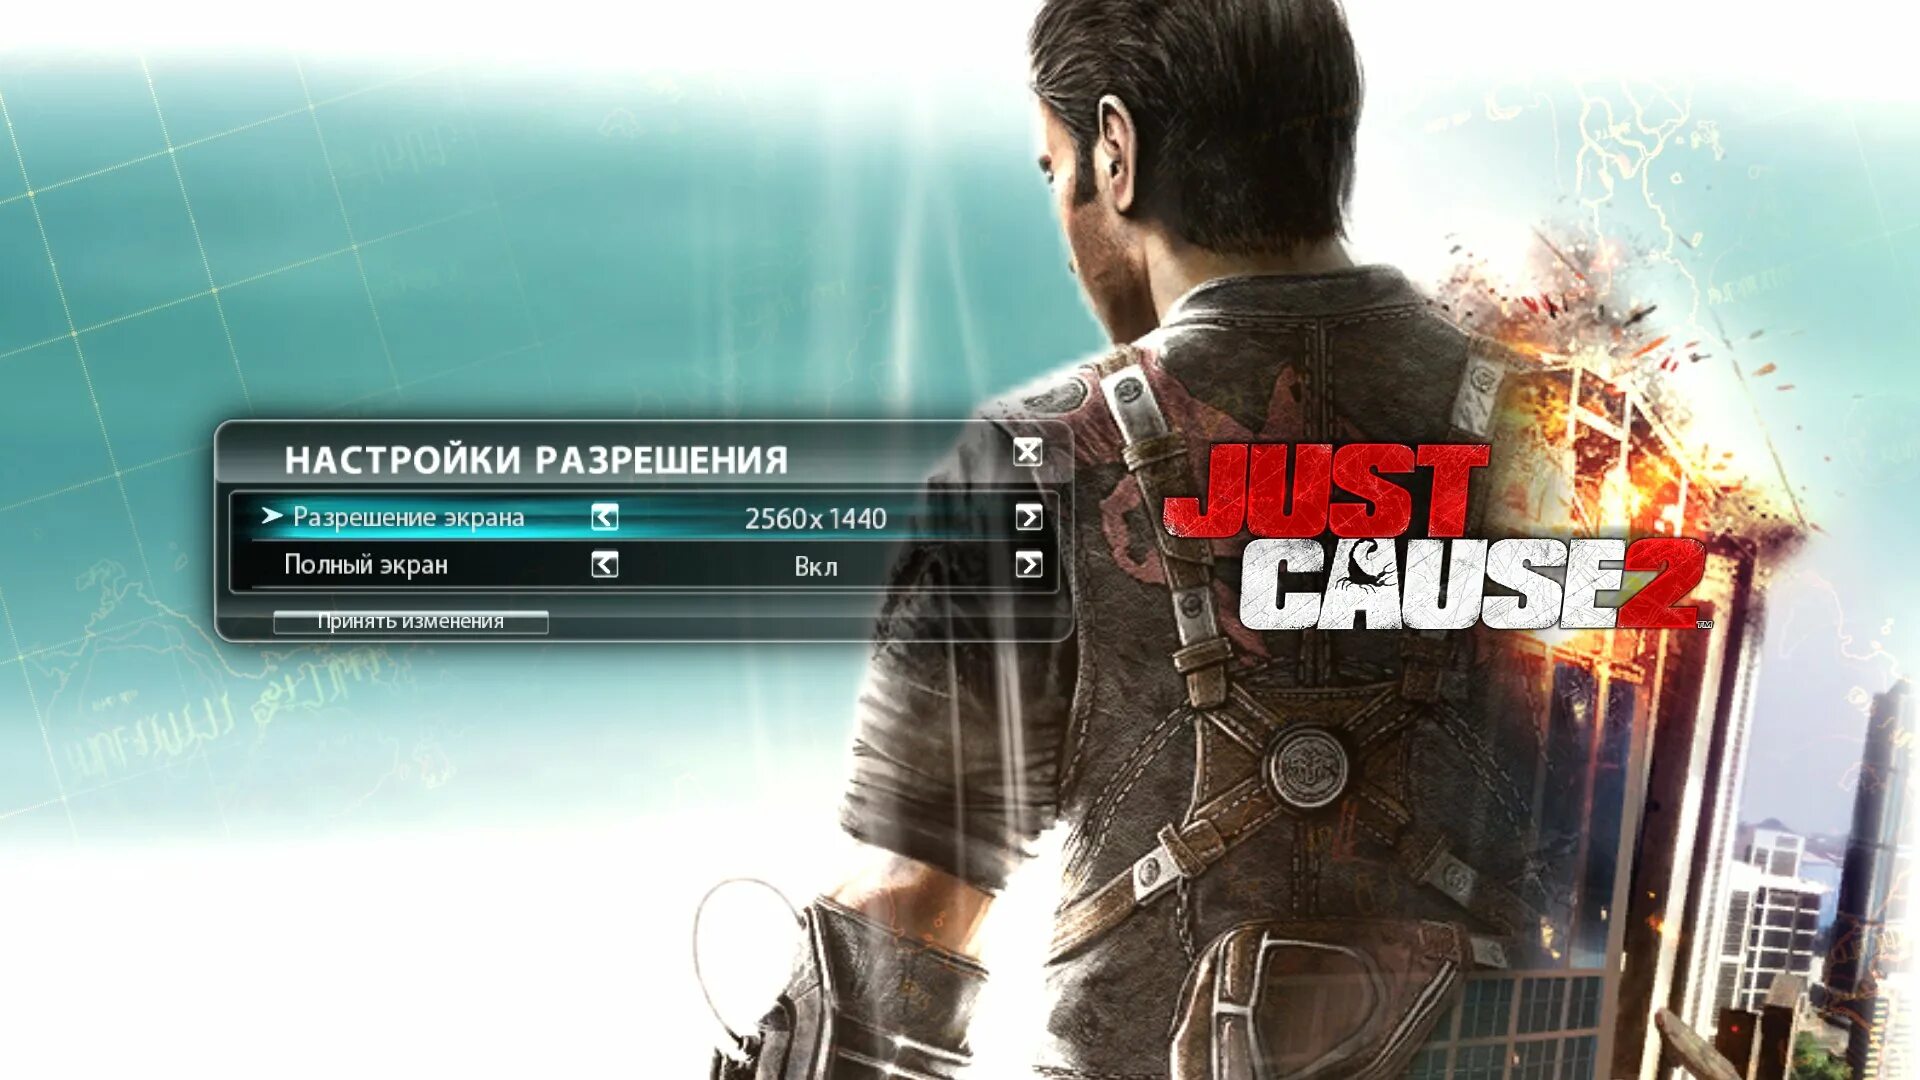 Just cause 2 Xbox 360 диск. Just cause 1 диск. Just cause 2 диск. Разрешение экрана в играх. This is just a game